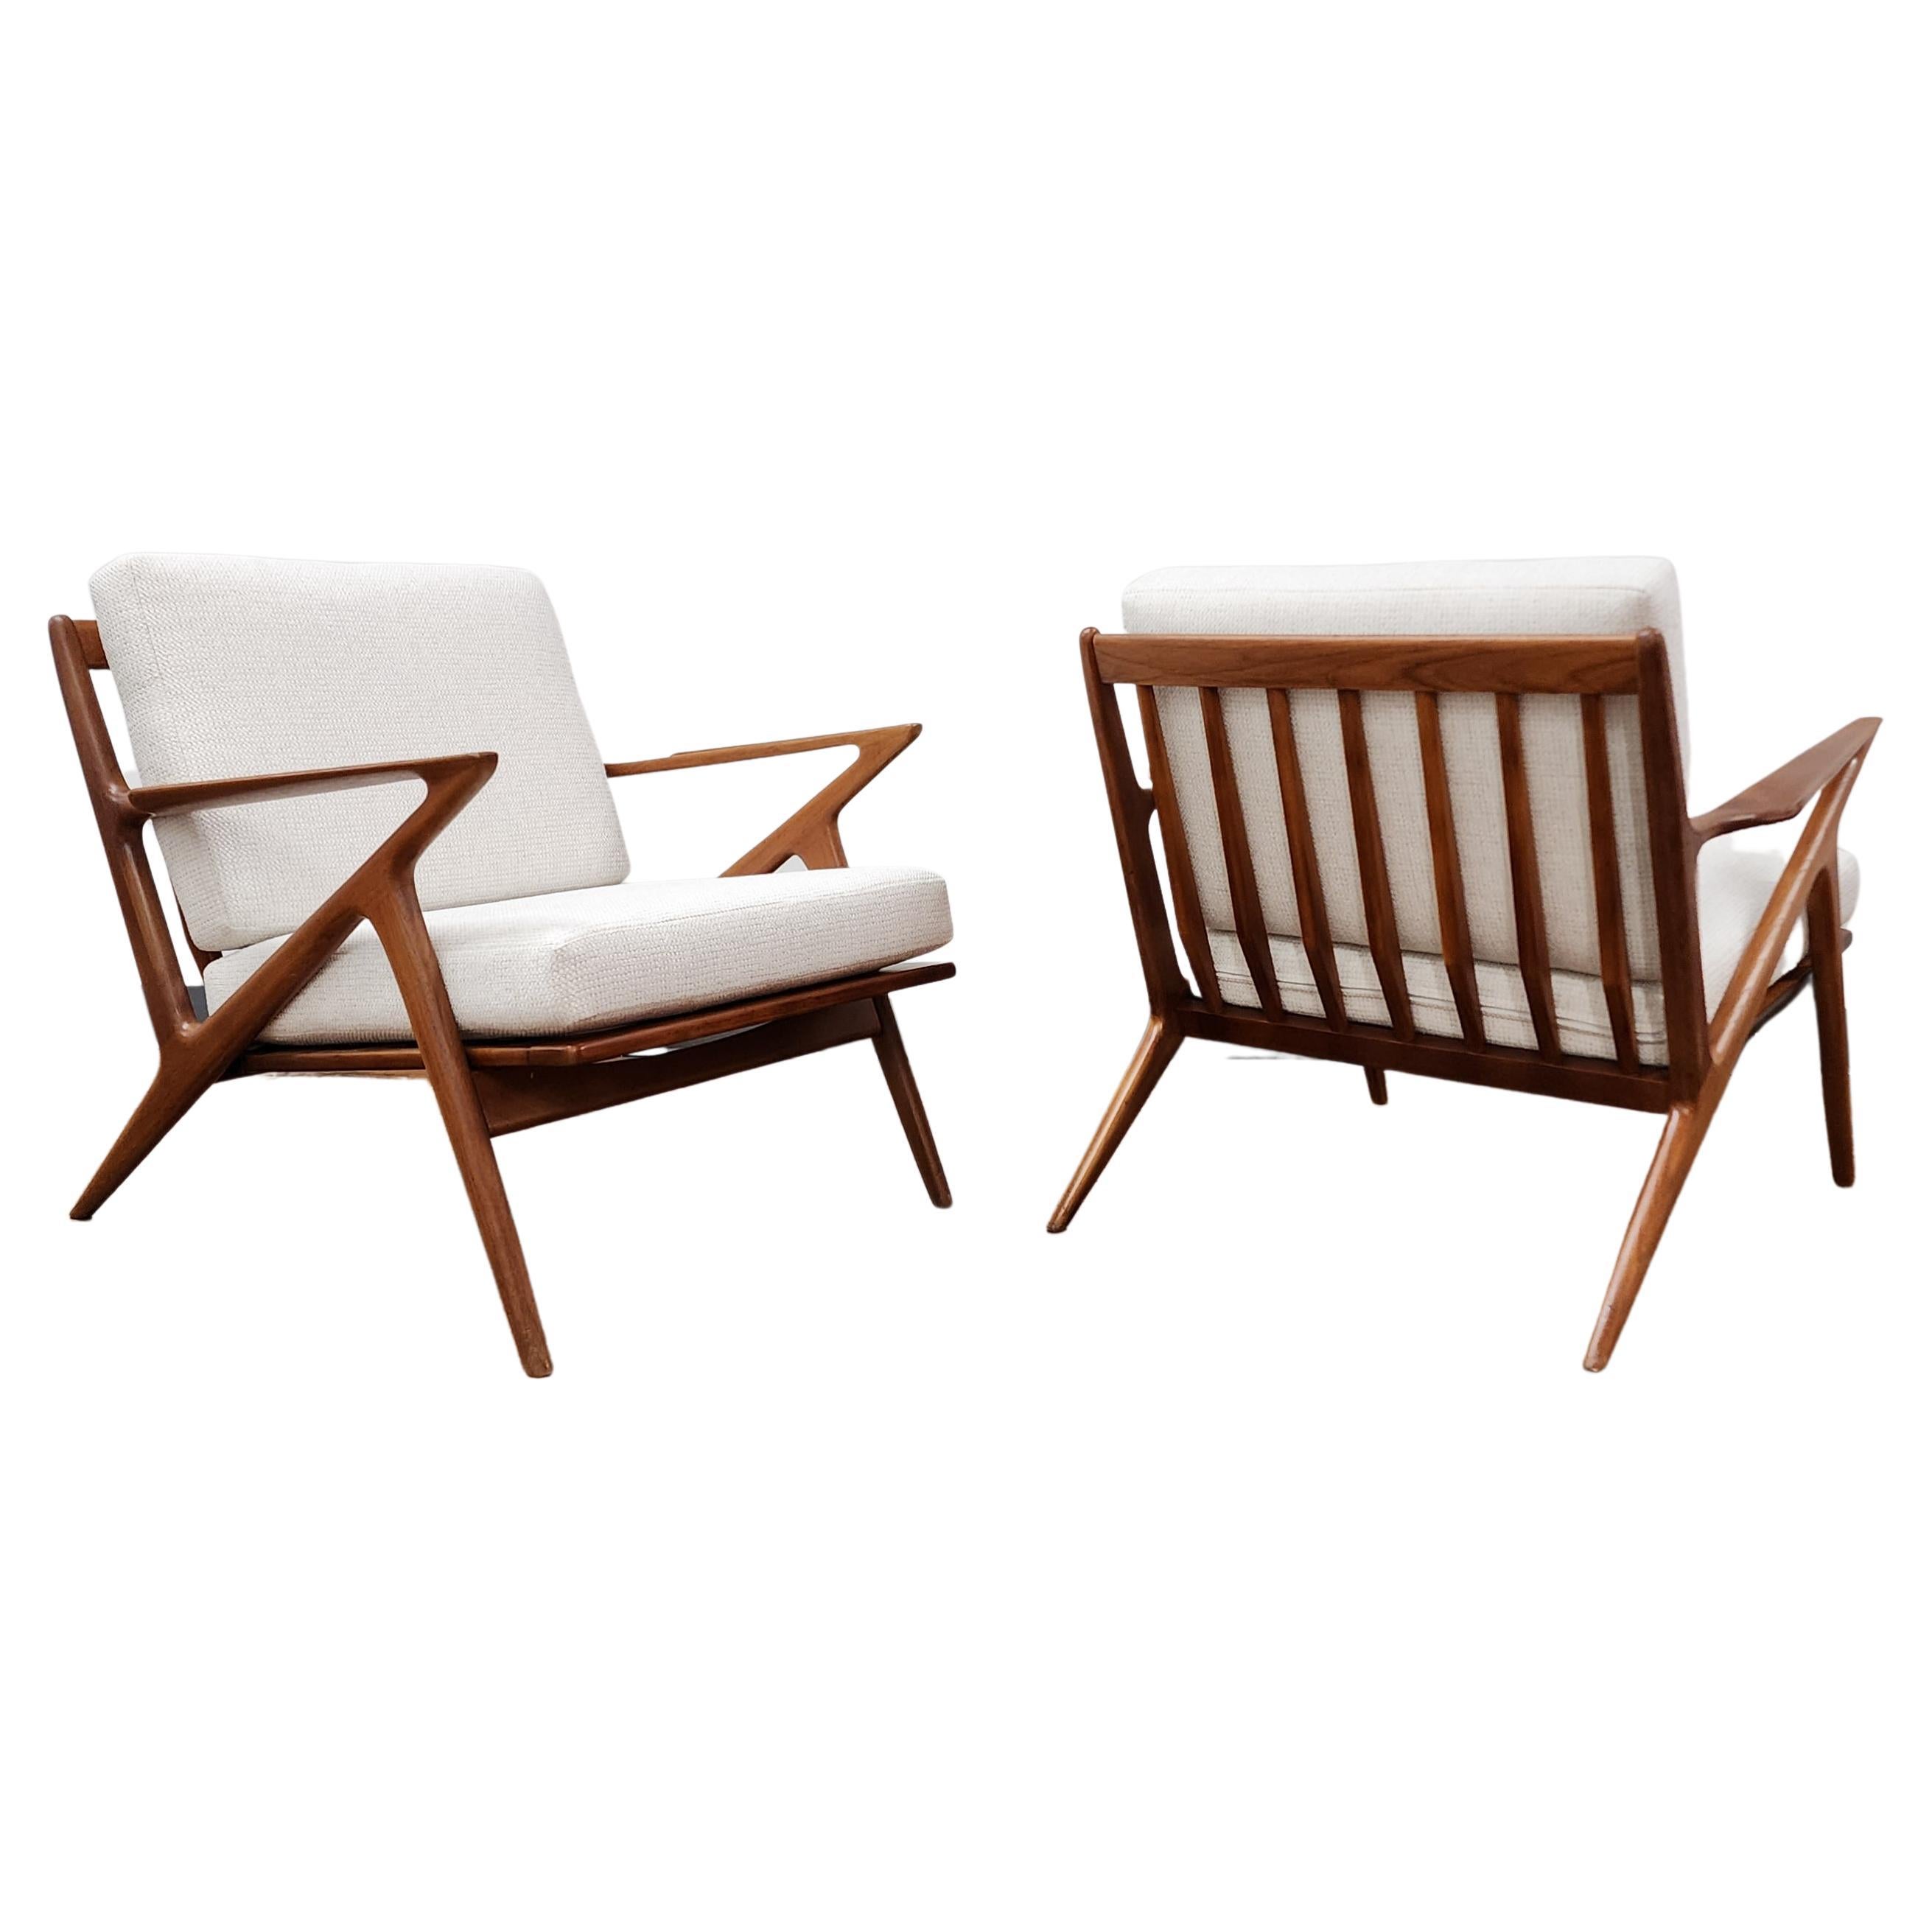 Pair, Vintage Teak Z Chairs by Poul Jensen for Selig